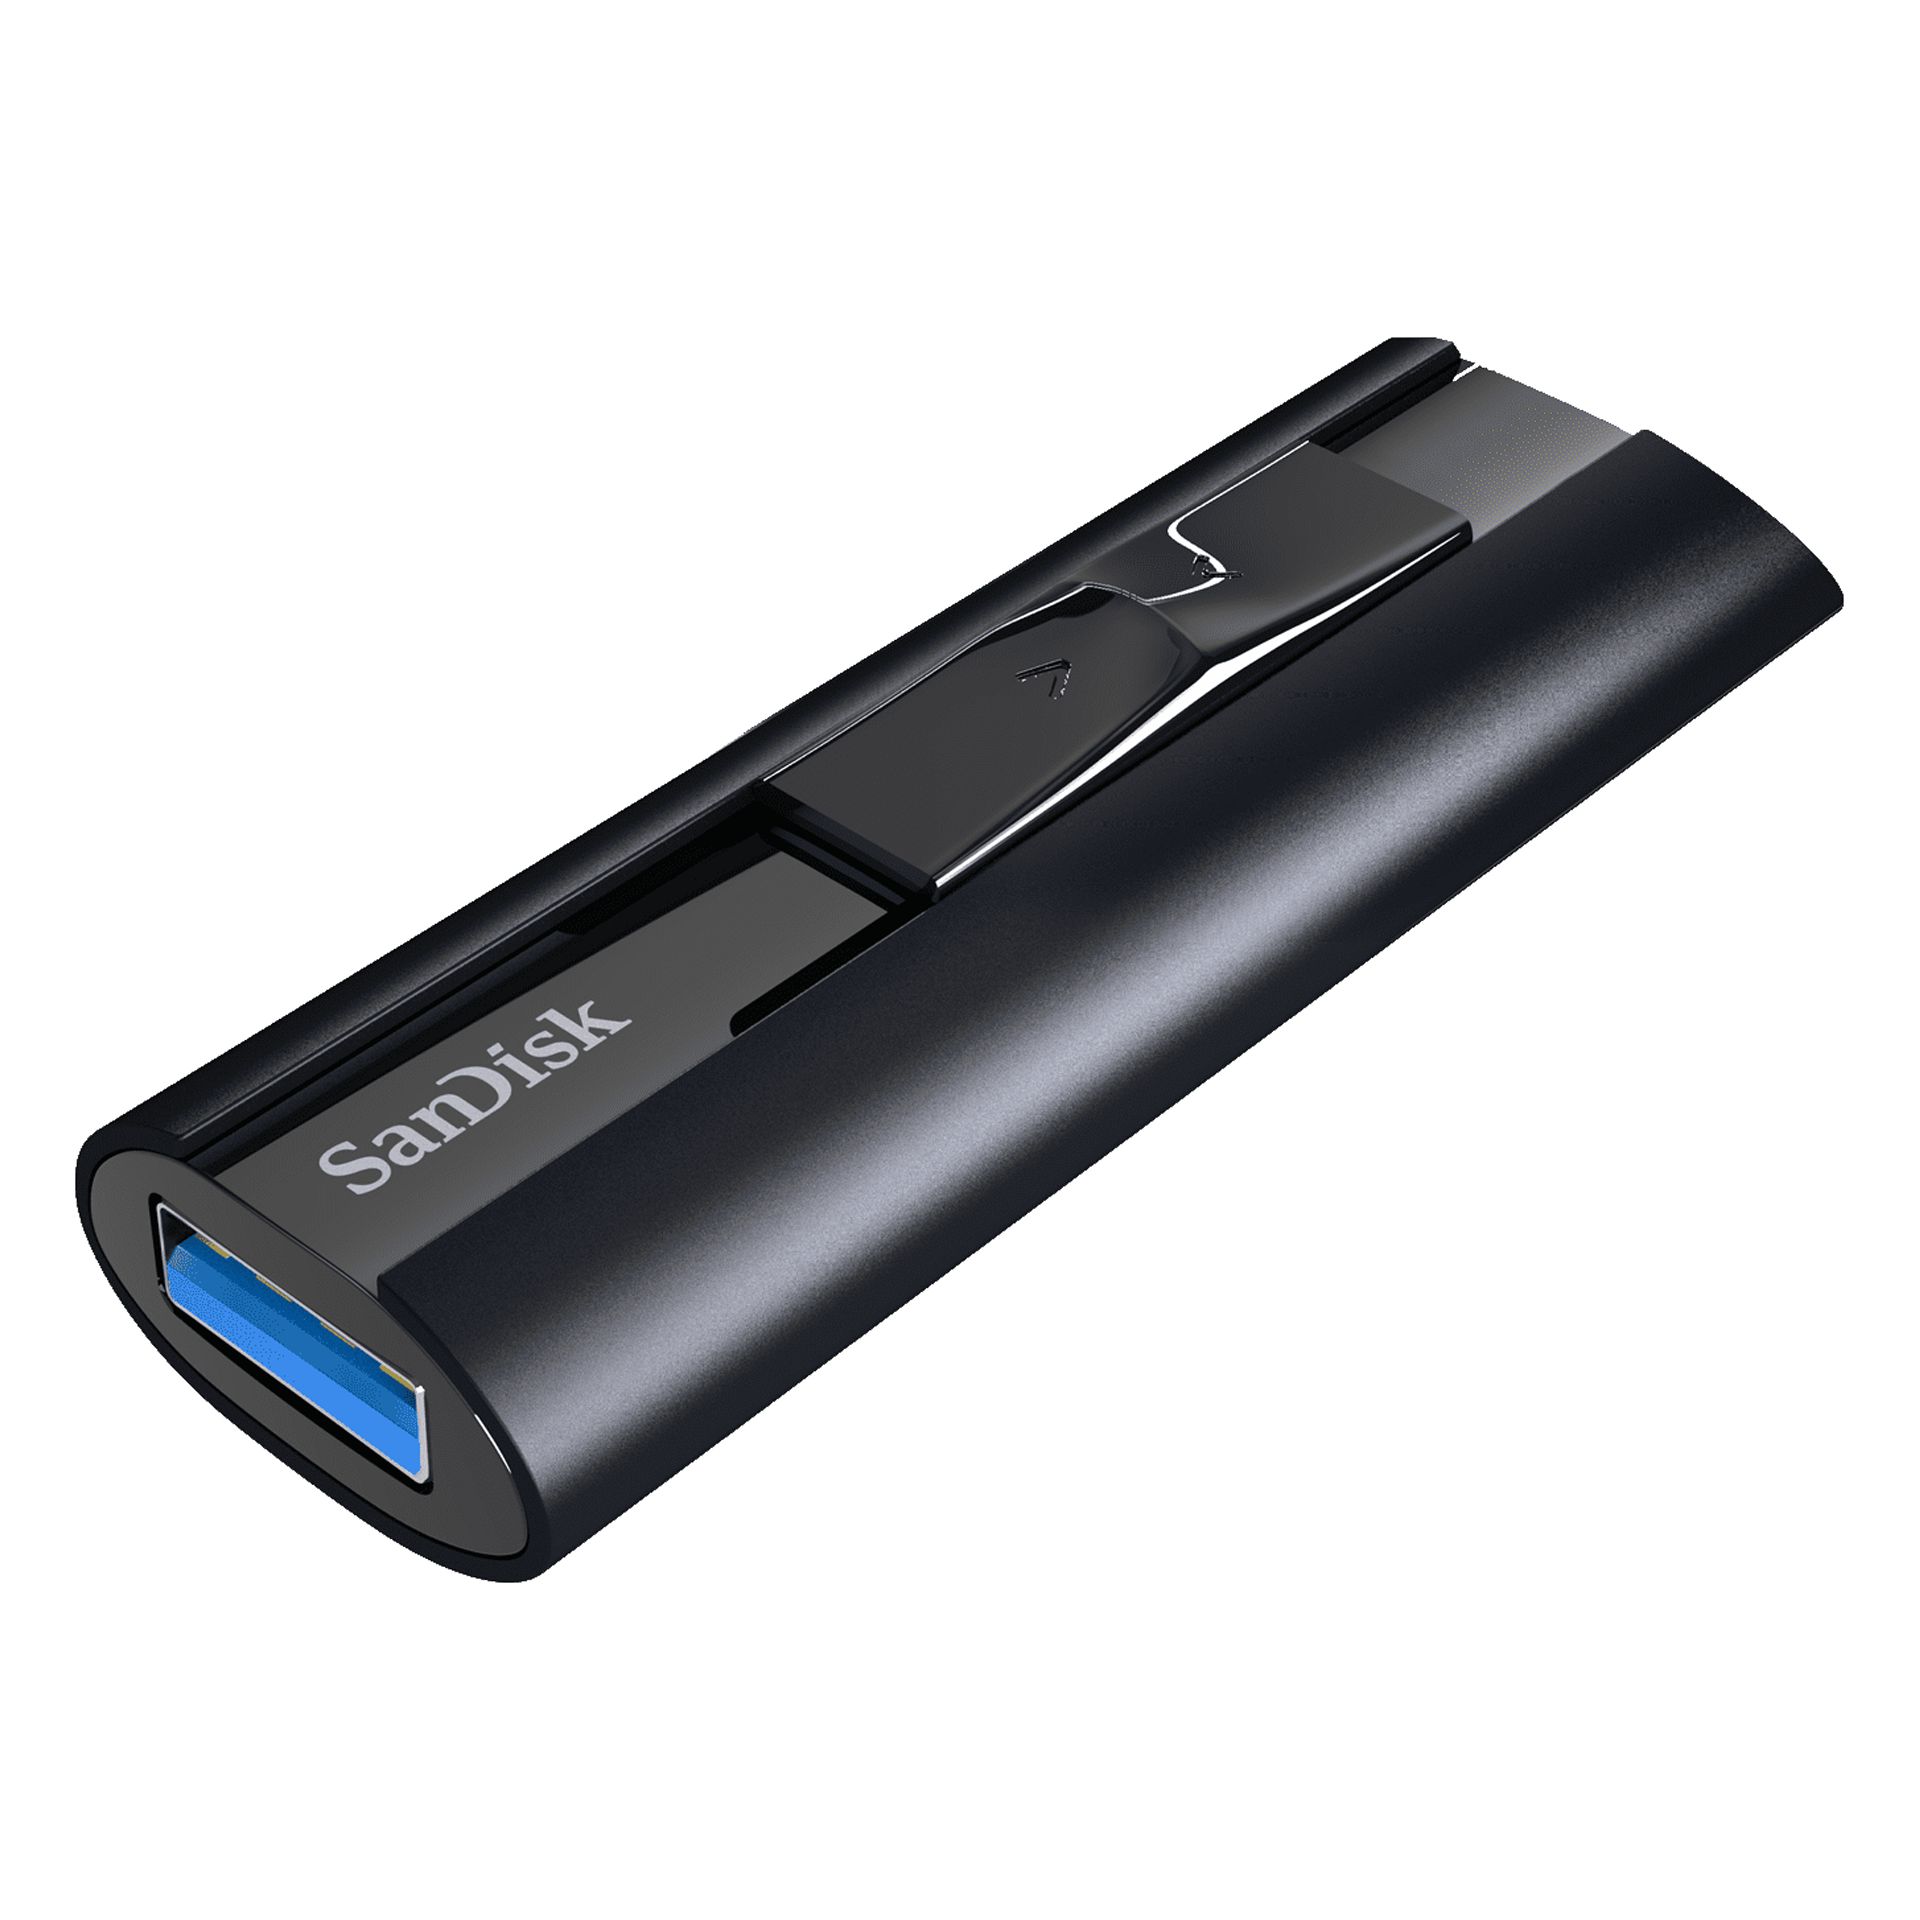 SanDisk 256GB Extreme PRO USB 3.2 Solid State Flash Drive - SDCZ880-256G-G46 - image 2 of 4